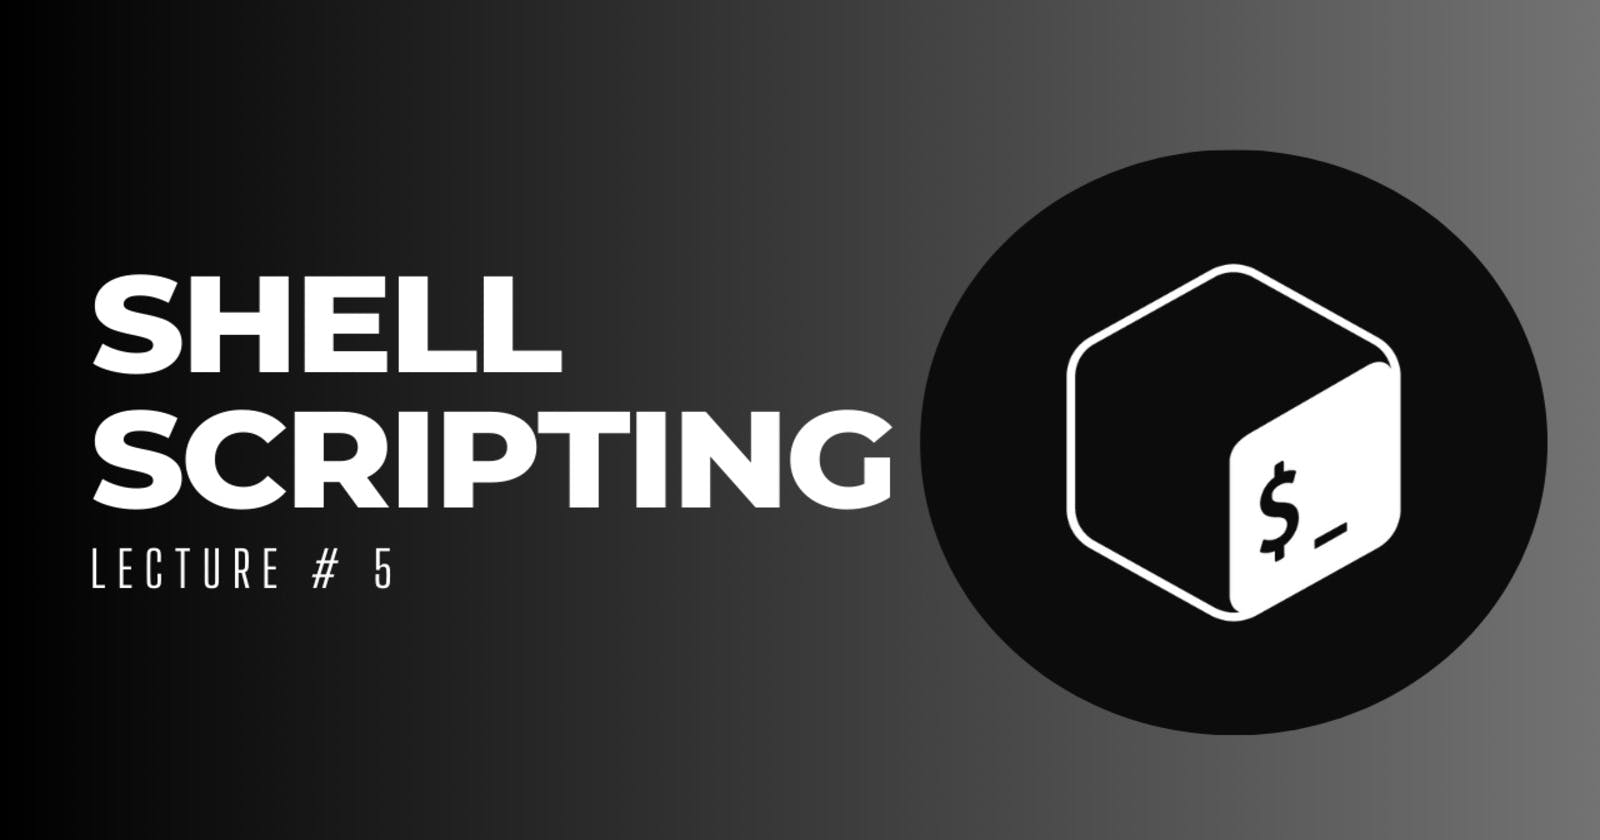 Lecture # 5 - Repetitive Structure in Shell Script